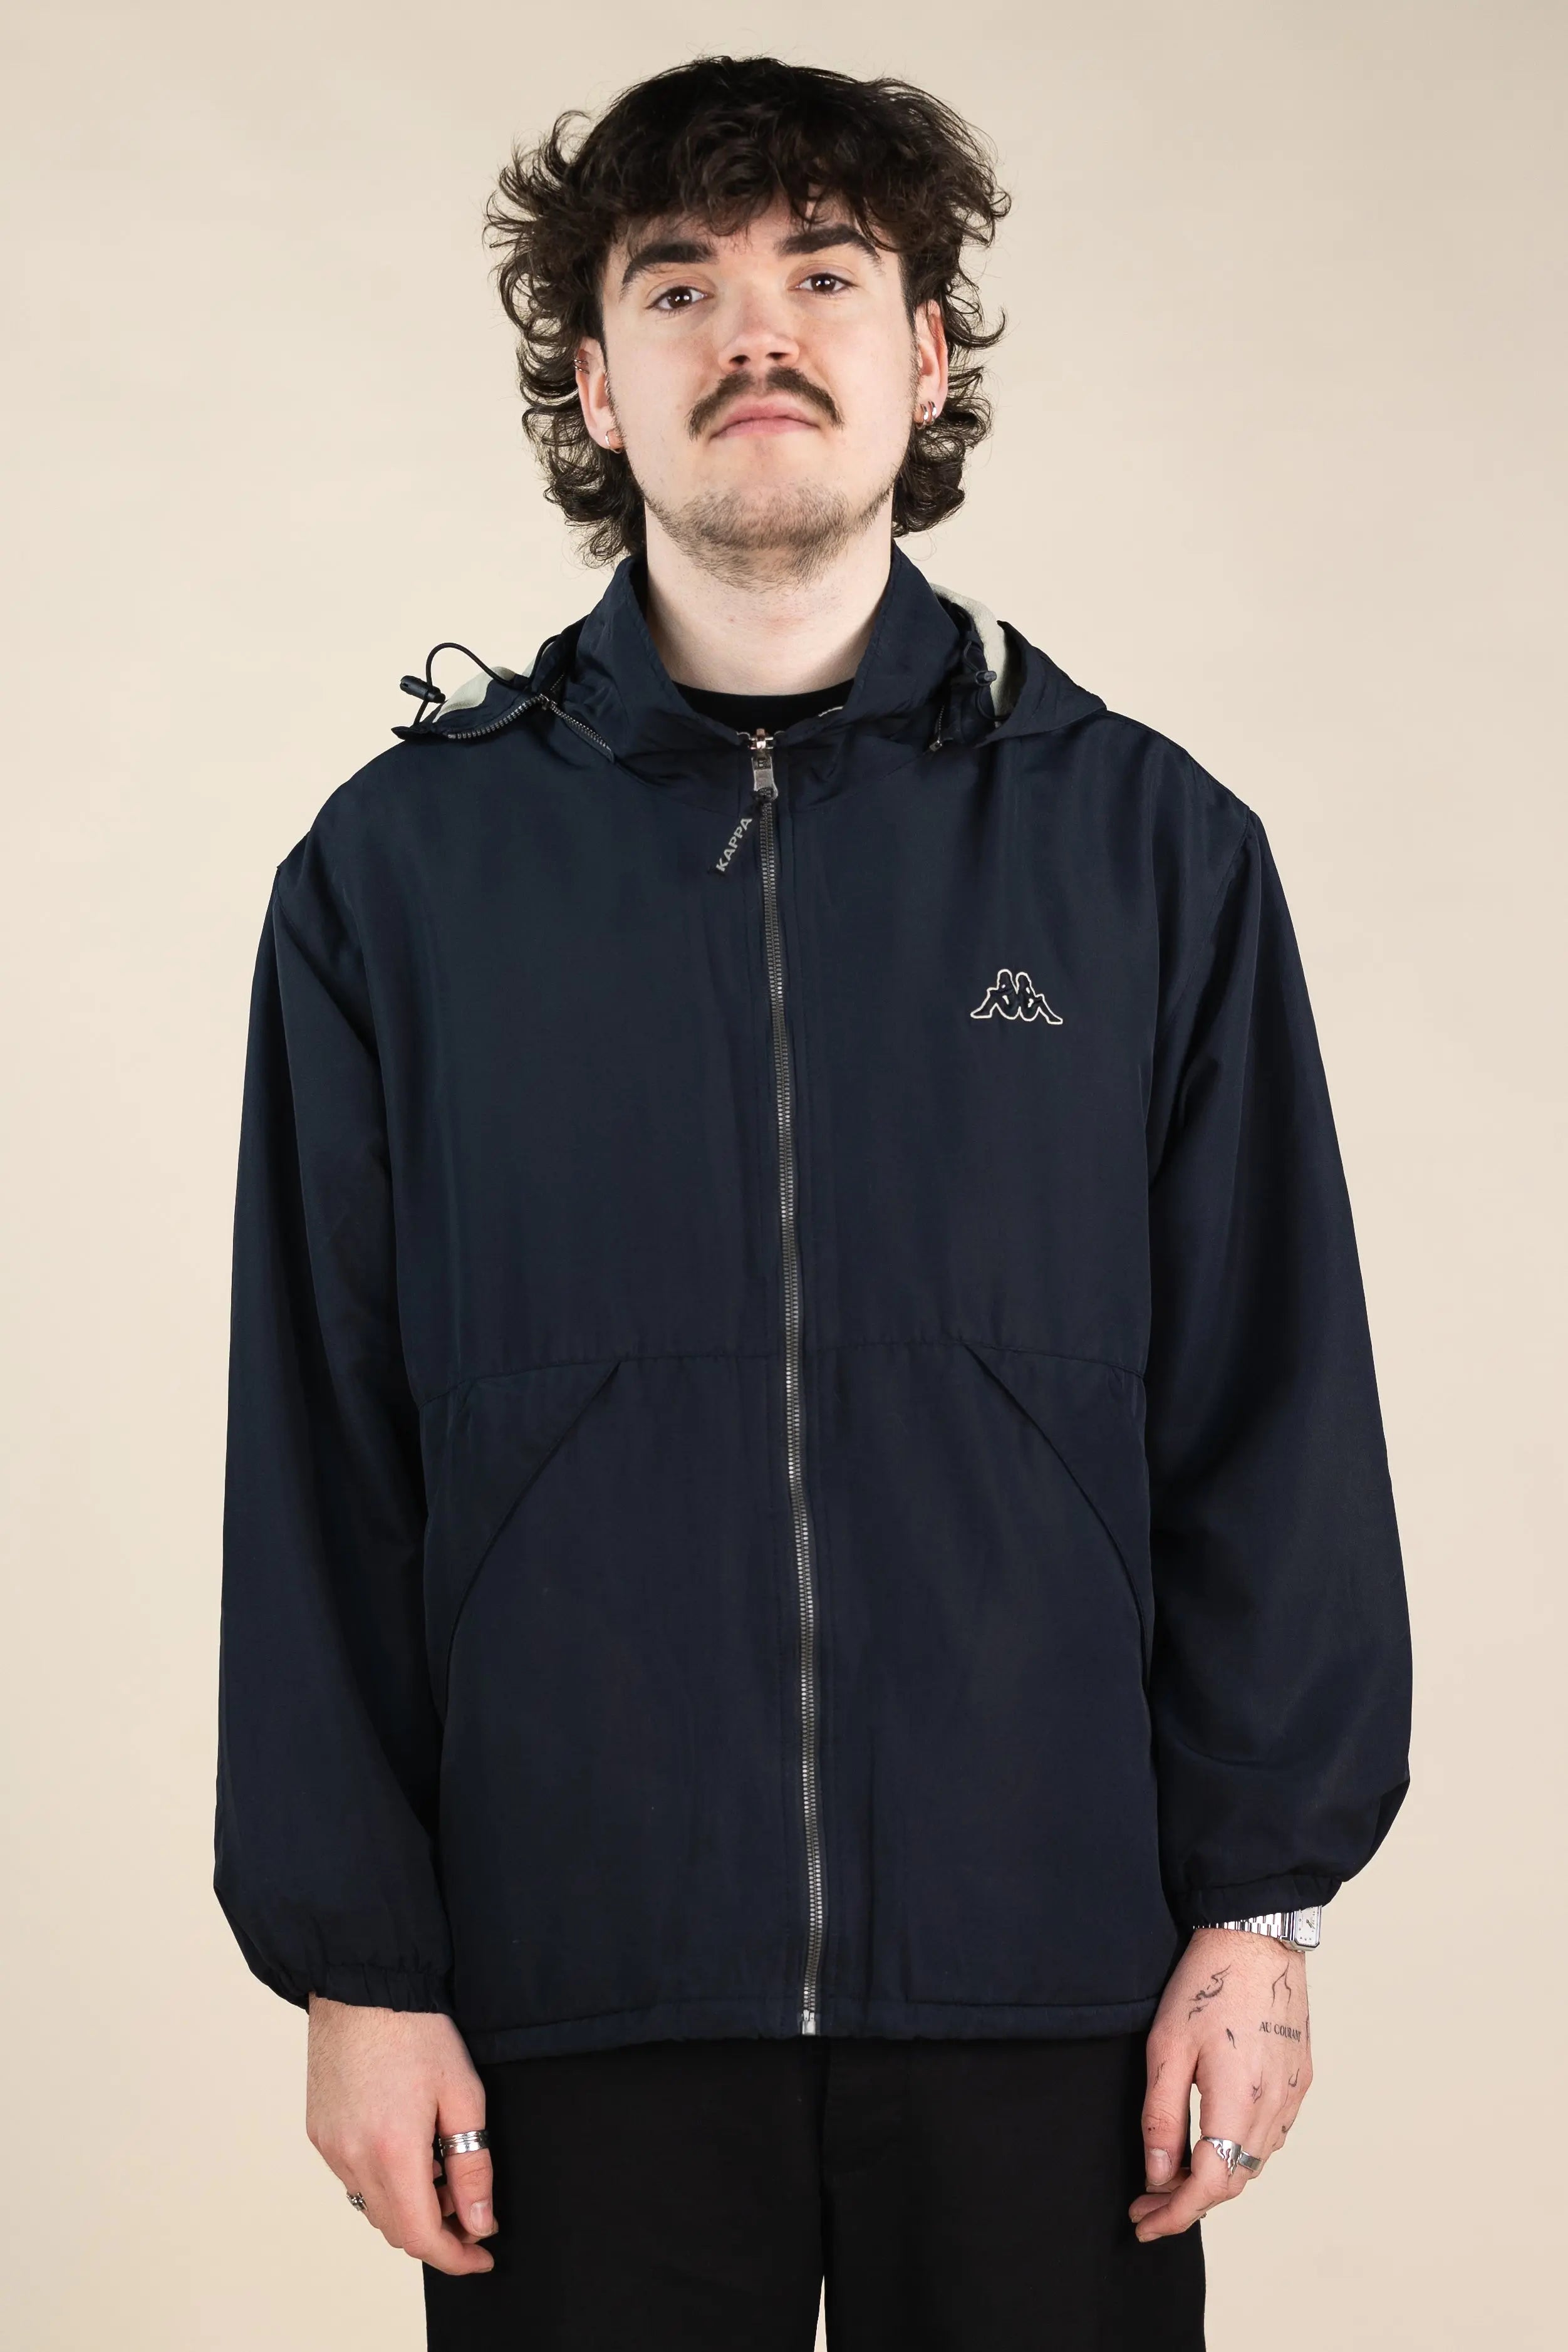 Kappa - Reversible Jacket- ThriftTale.com - Vintage and second handclothing